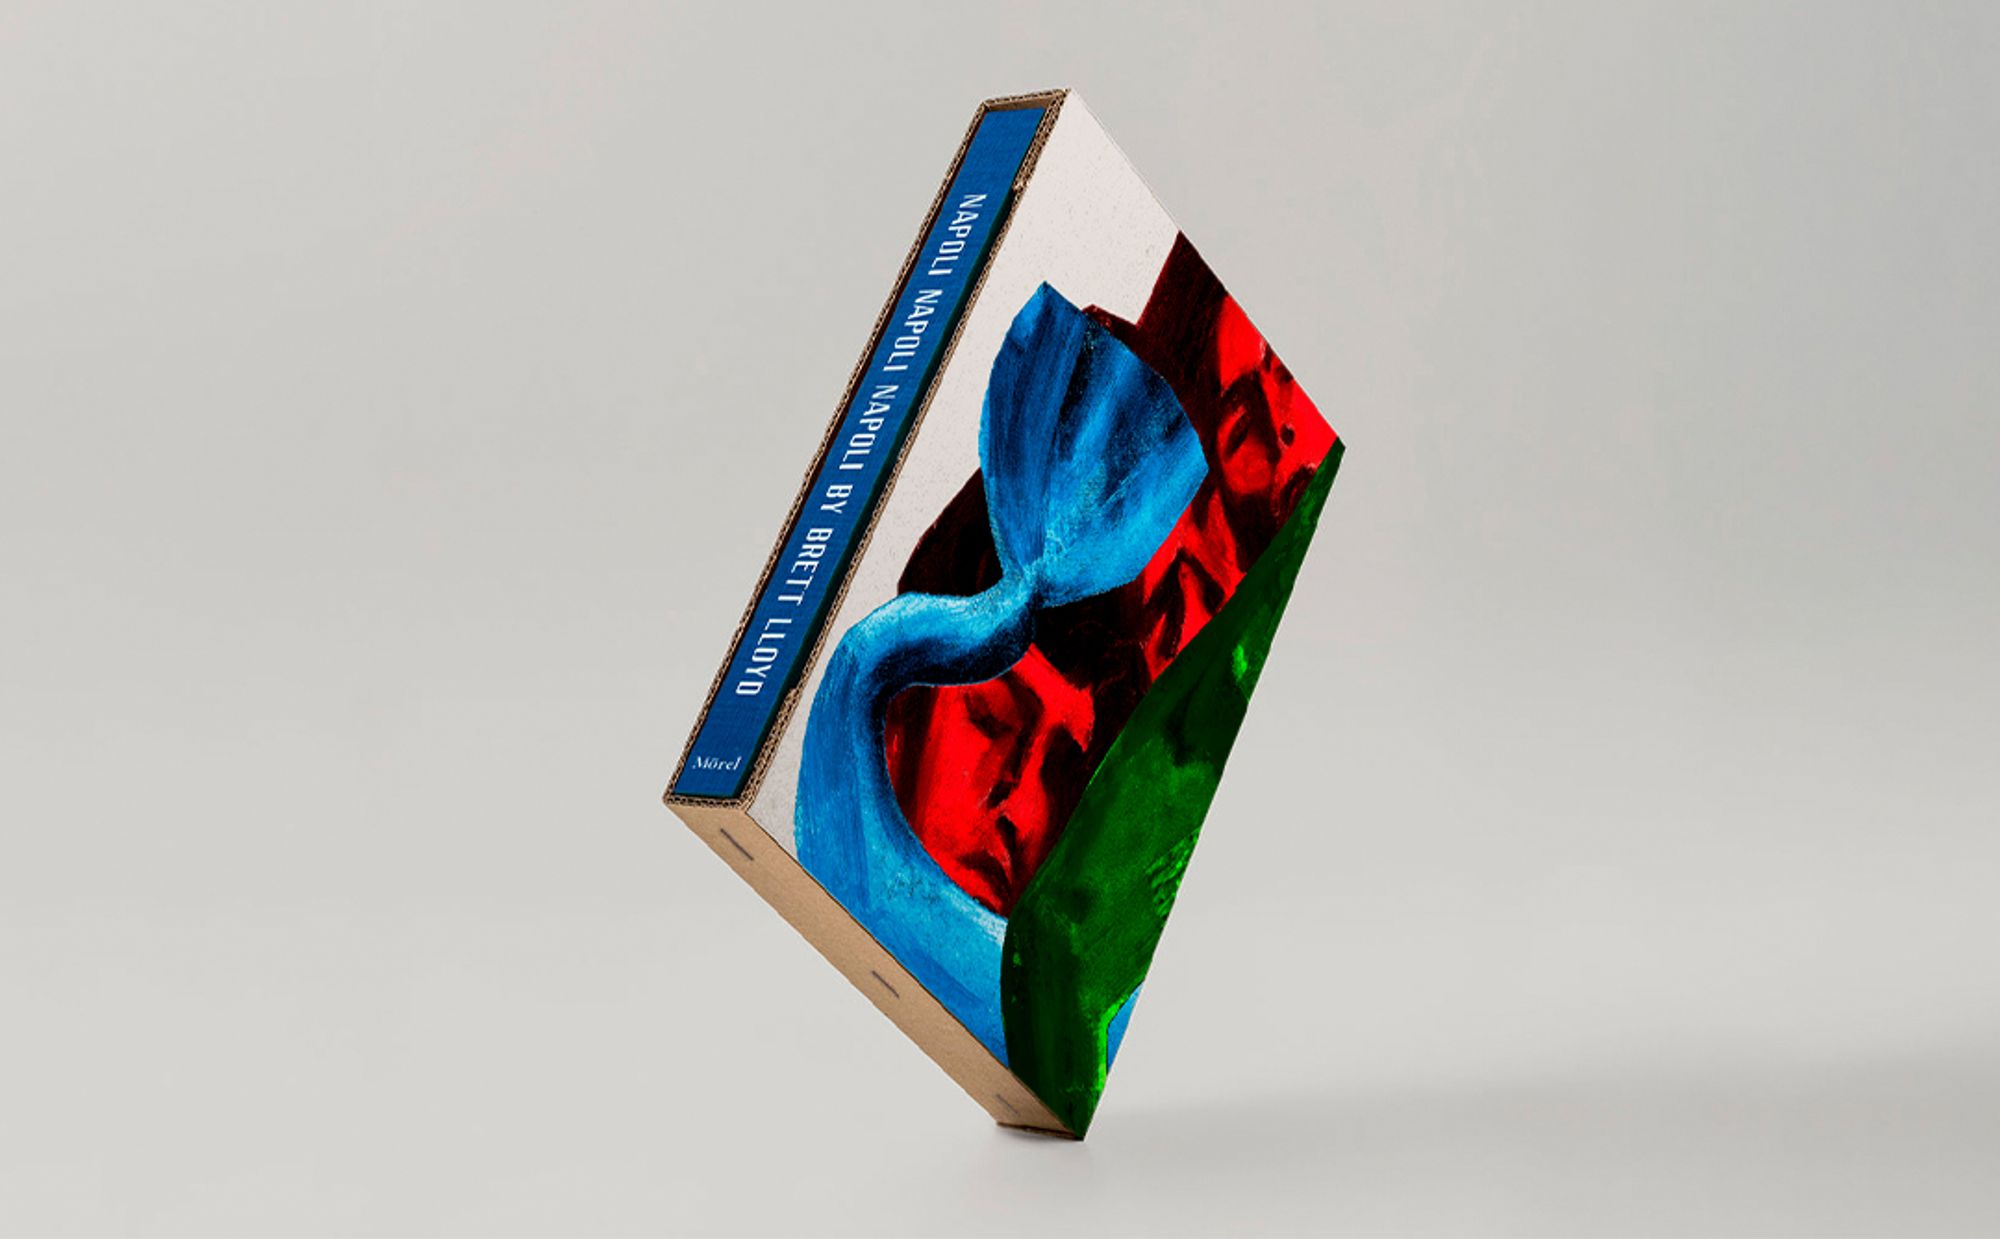 CREATIVE DIRECTION – DESIGN 100 PER LIMITED EDITION, BOXED WITH SIGNED ARCHIVAL PRINT